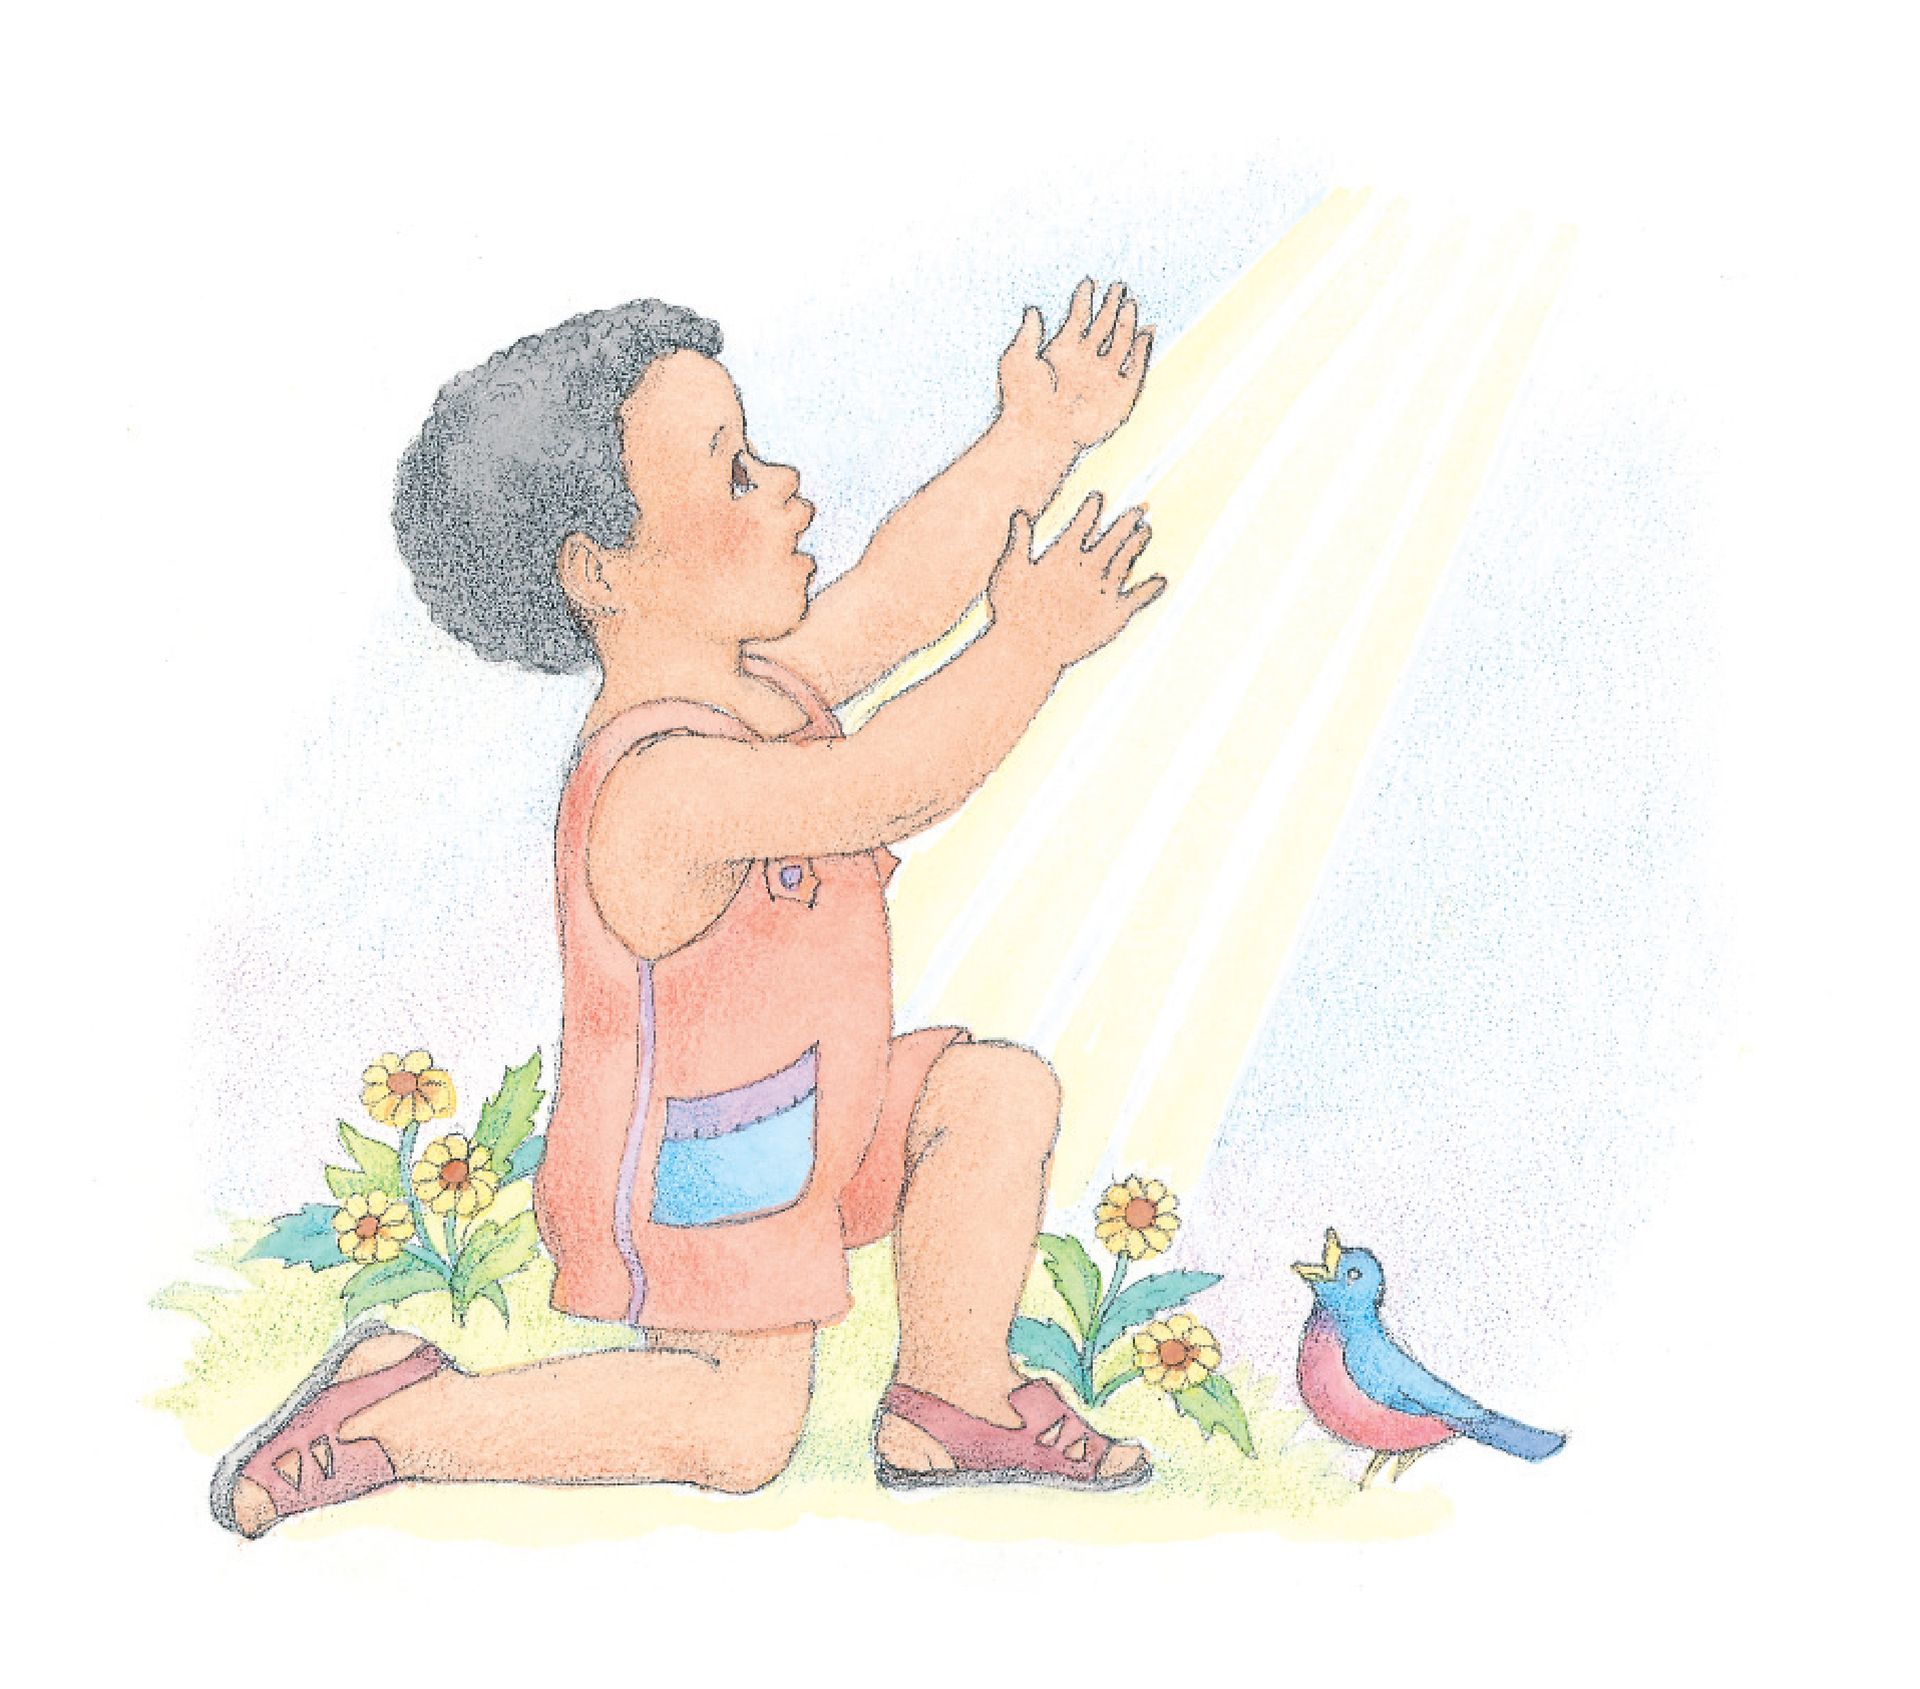 A young boy kneeling and reaching toward the sun. From the Children’s Songbook, page 60, “Jesus Wants Me for a Sunbeam”; watercolor illustration by Phyllis Luch.